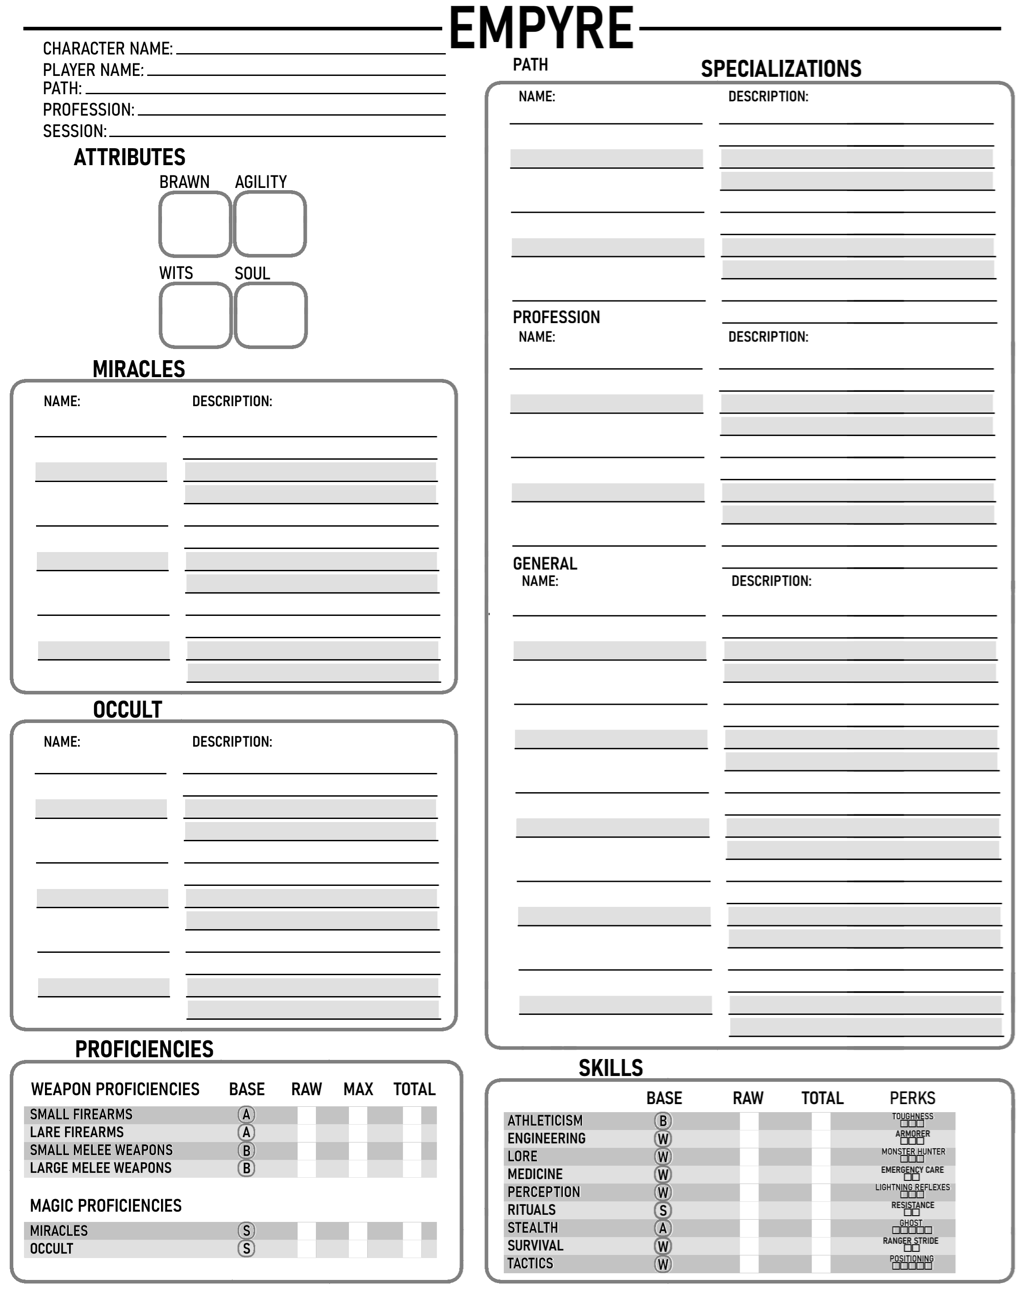 The new character sheet